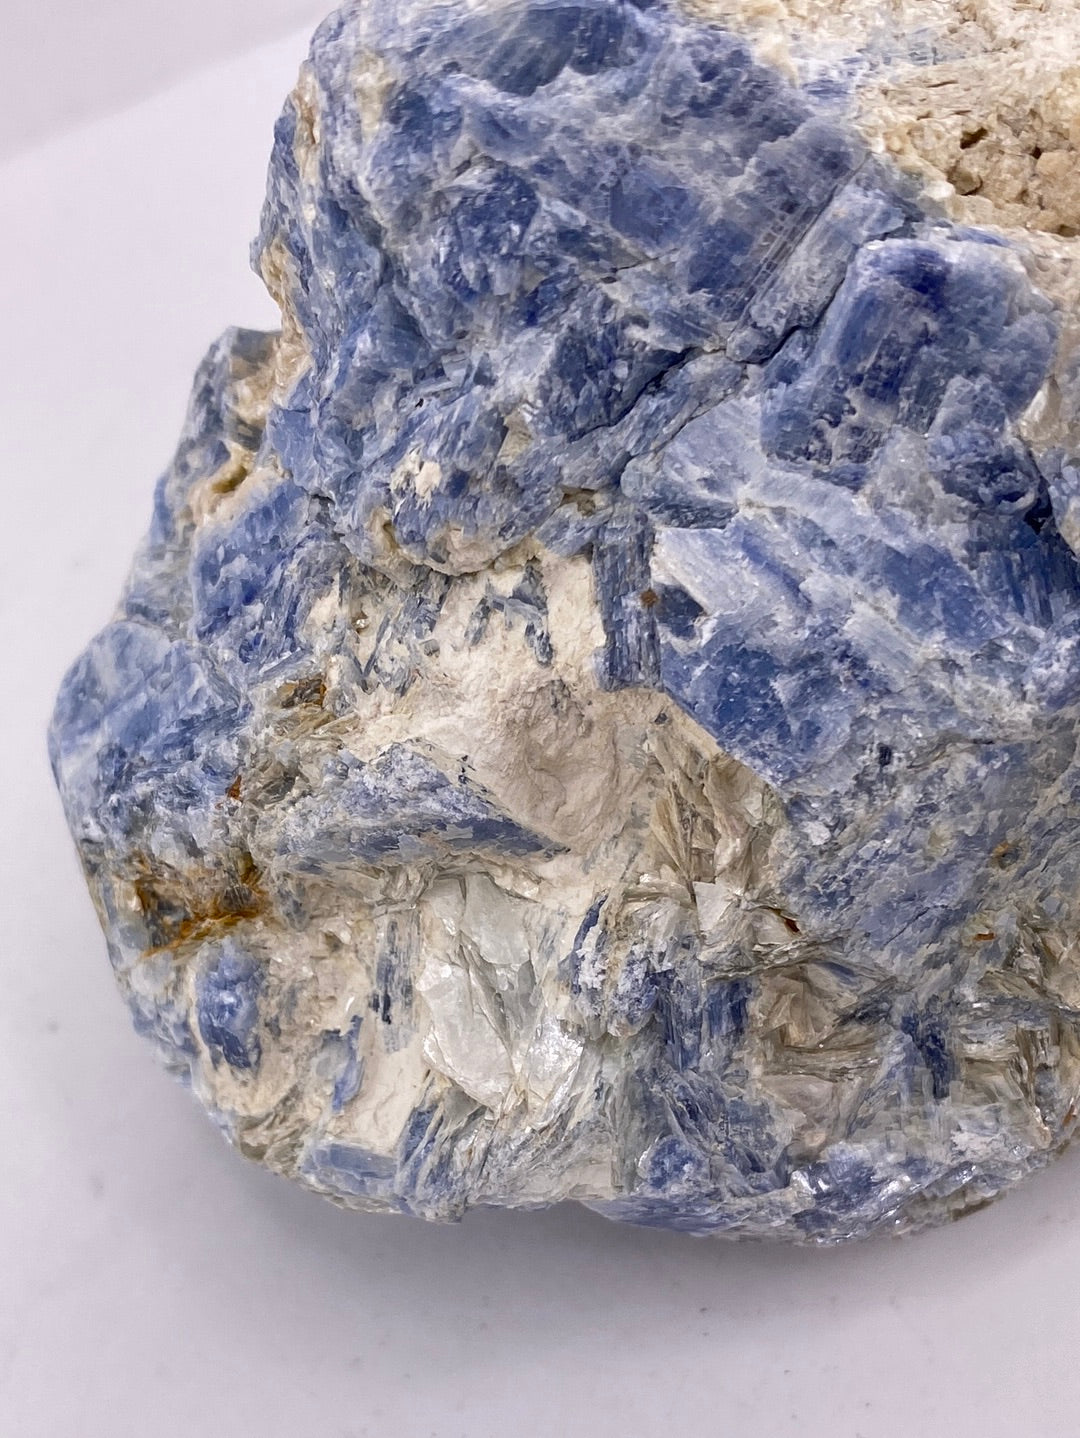 Raw blue kyanite available at wholesale and retail prices, only at our crystal shop in San Diego!